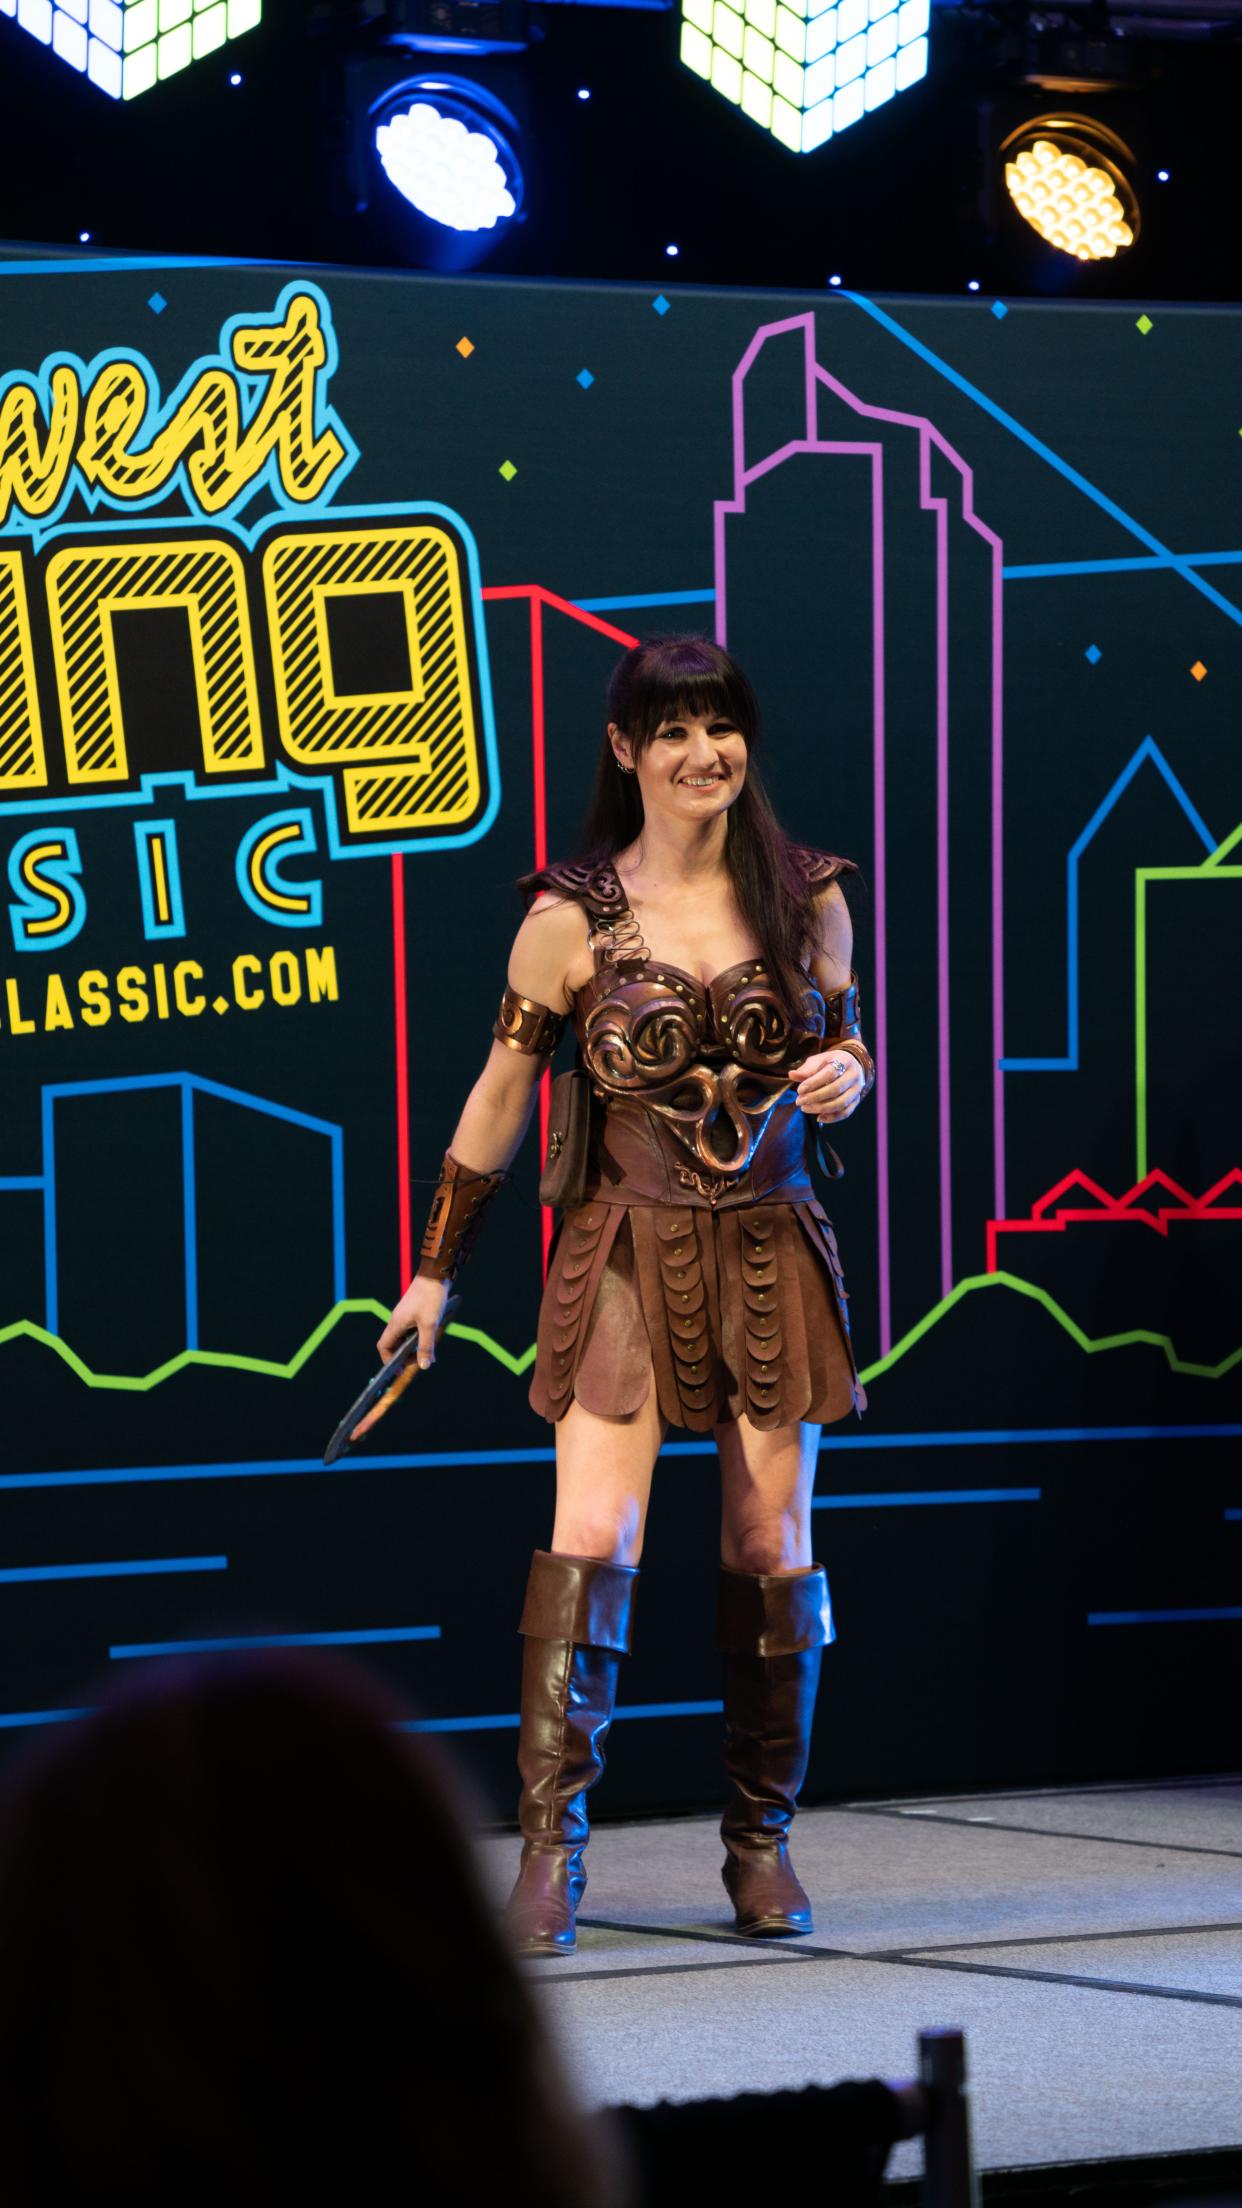 Costume contests and cosplay are popular at Milwaukee's annual Midwest Gaming Classic.